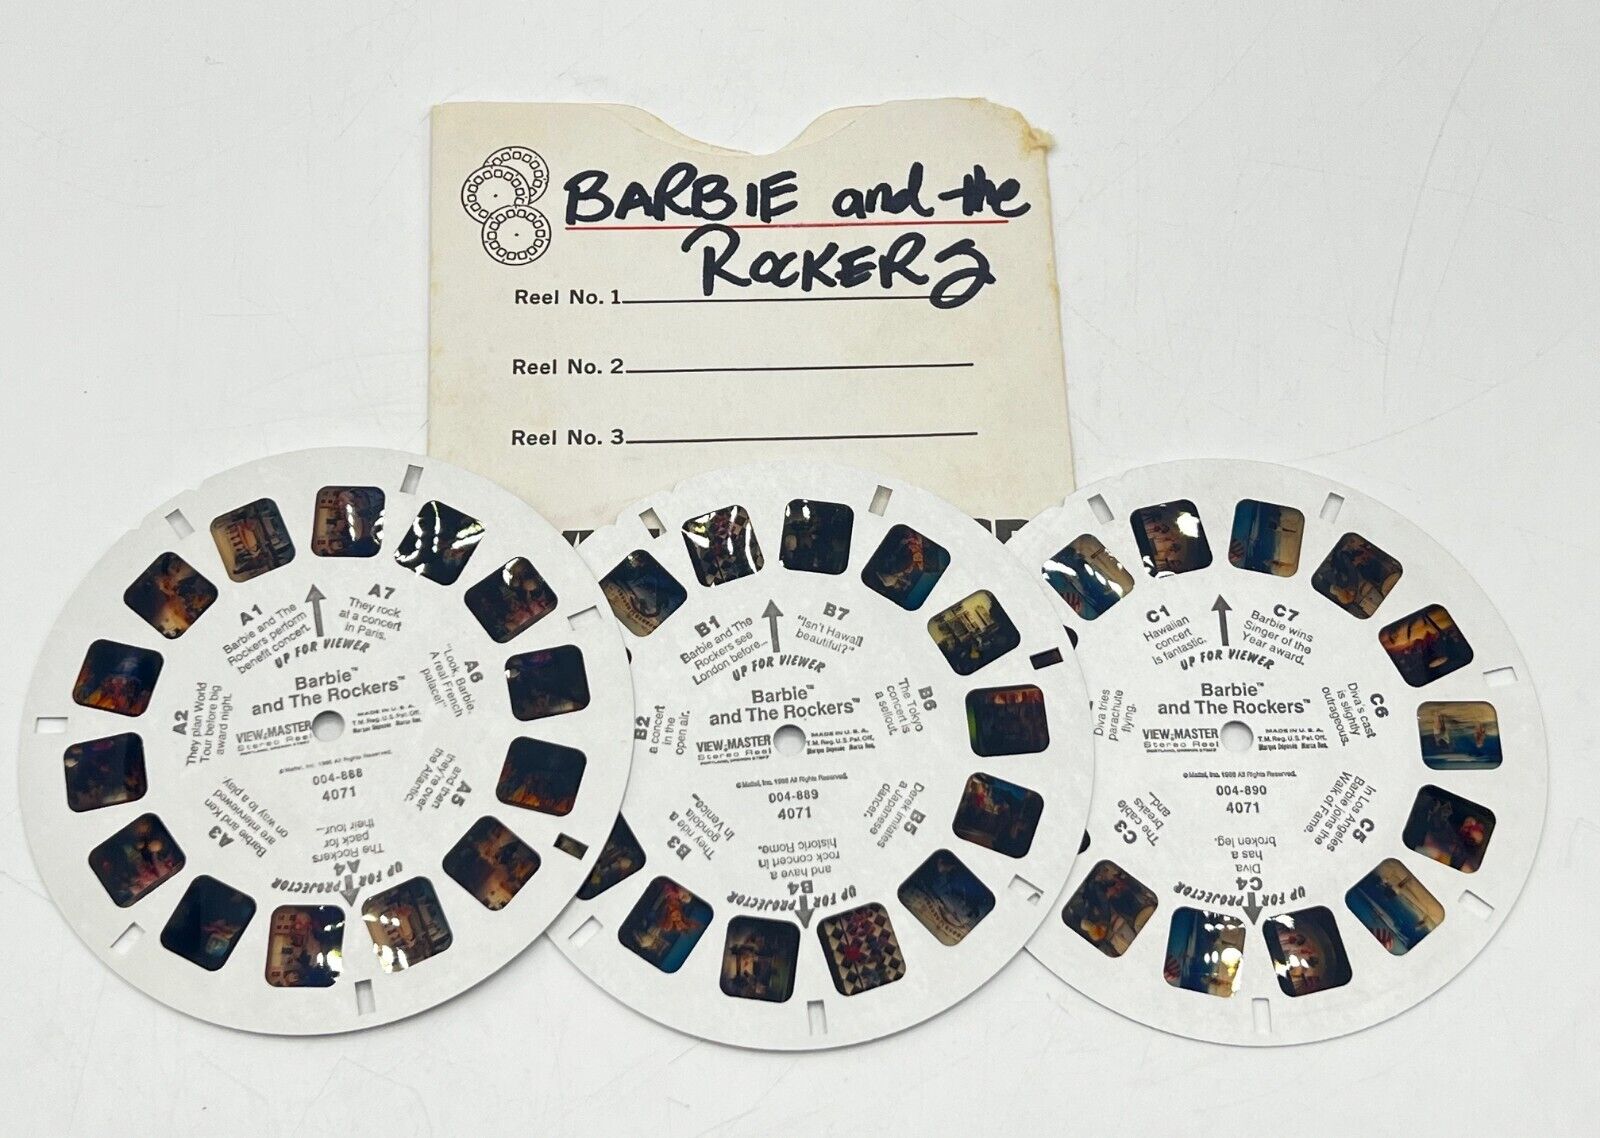 Vintage 1986 View-Master 3 Reels - Barbie and the Rockers #4071